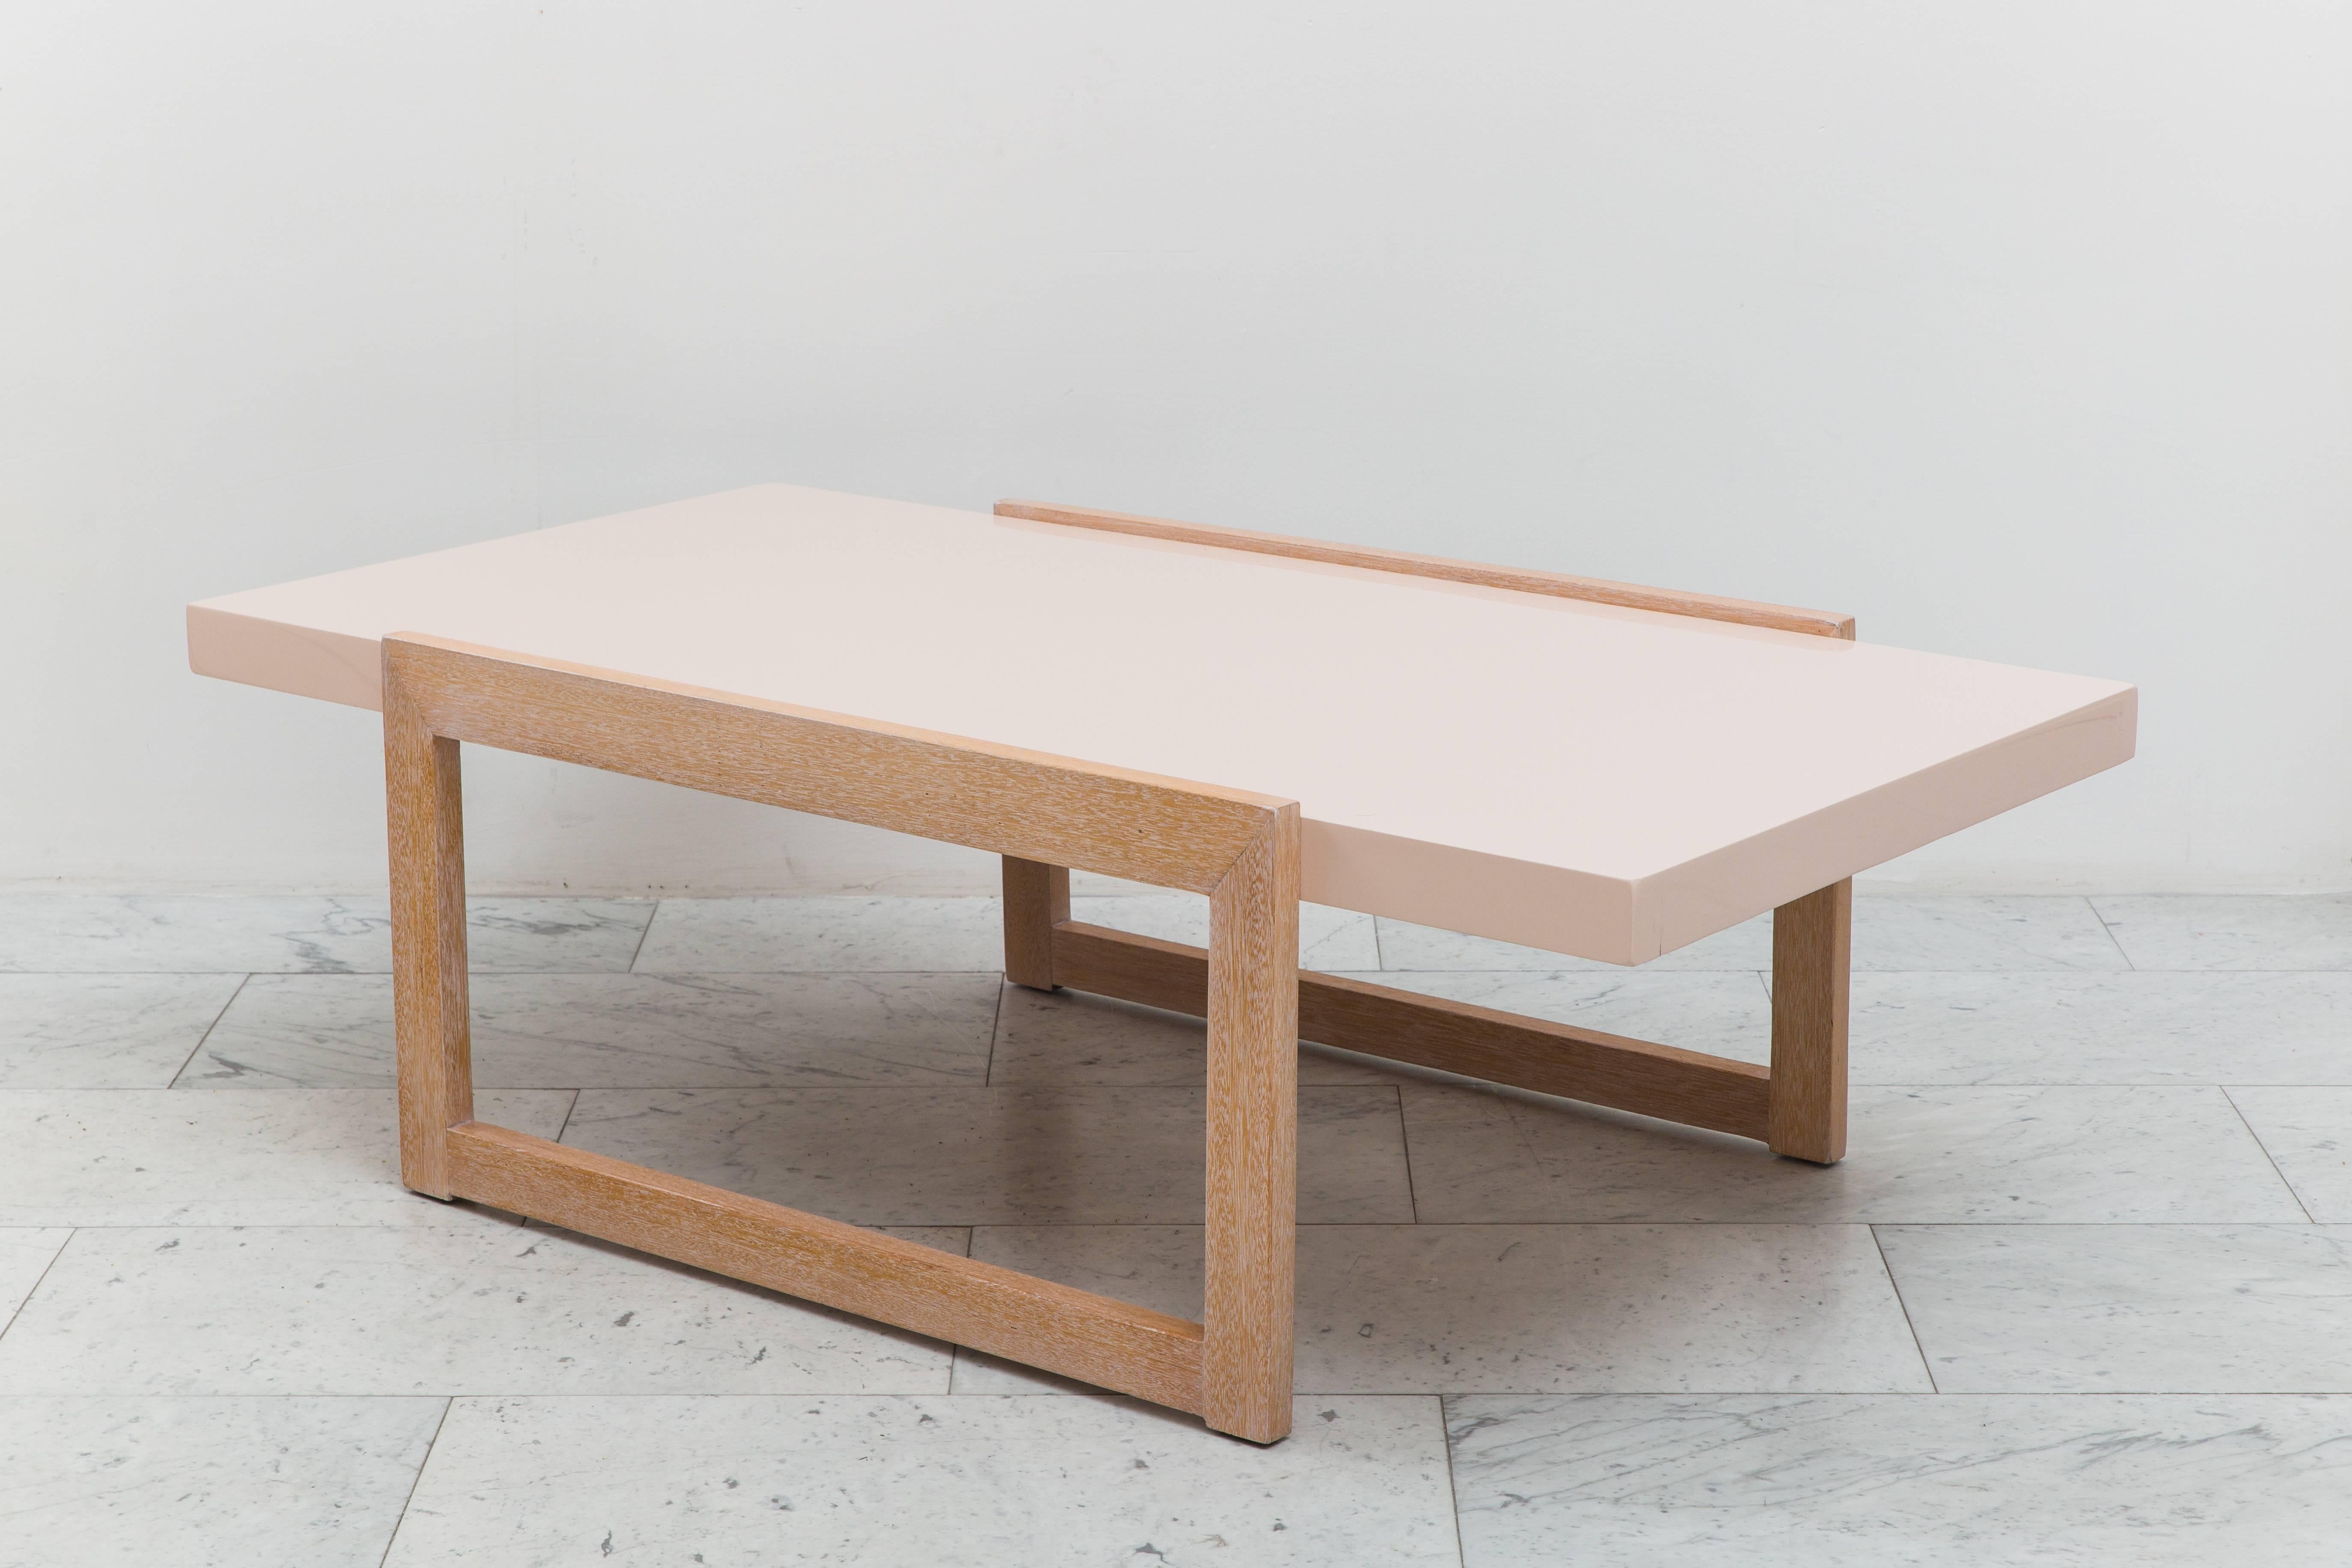 Designed for Brown Saltman this bleached mahogany low table epitomizes Laszlo’s penchant for paired down traditionalism and California modernity. This architectural cocktail table features a shell pink lacquered mahogany top floating on two